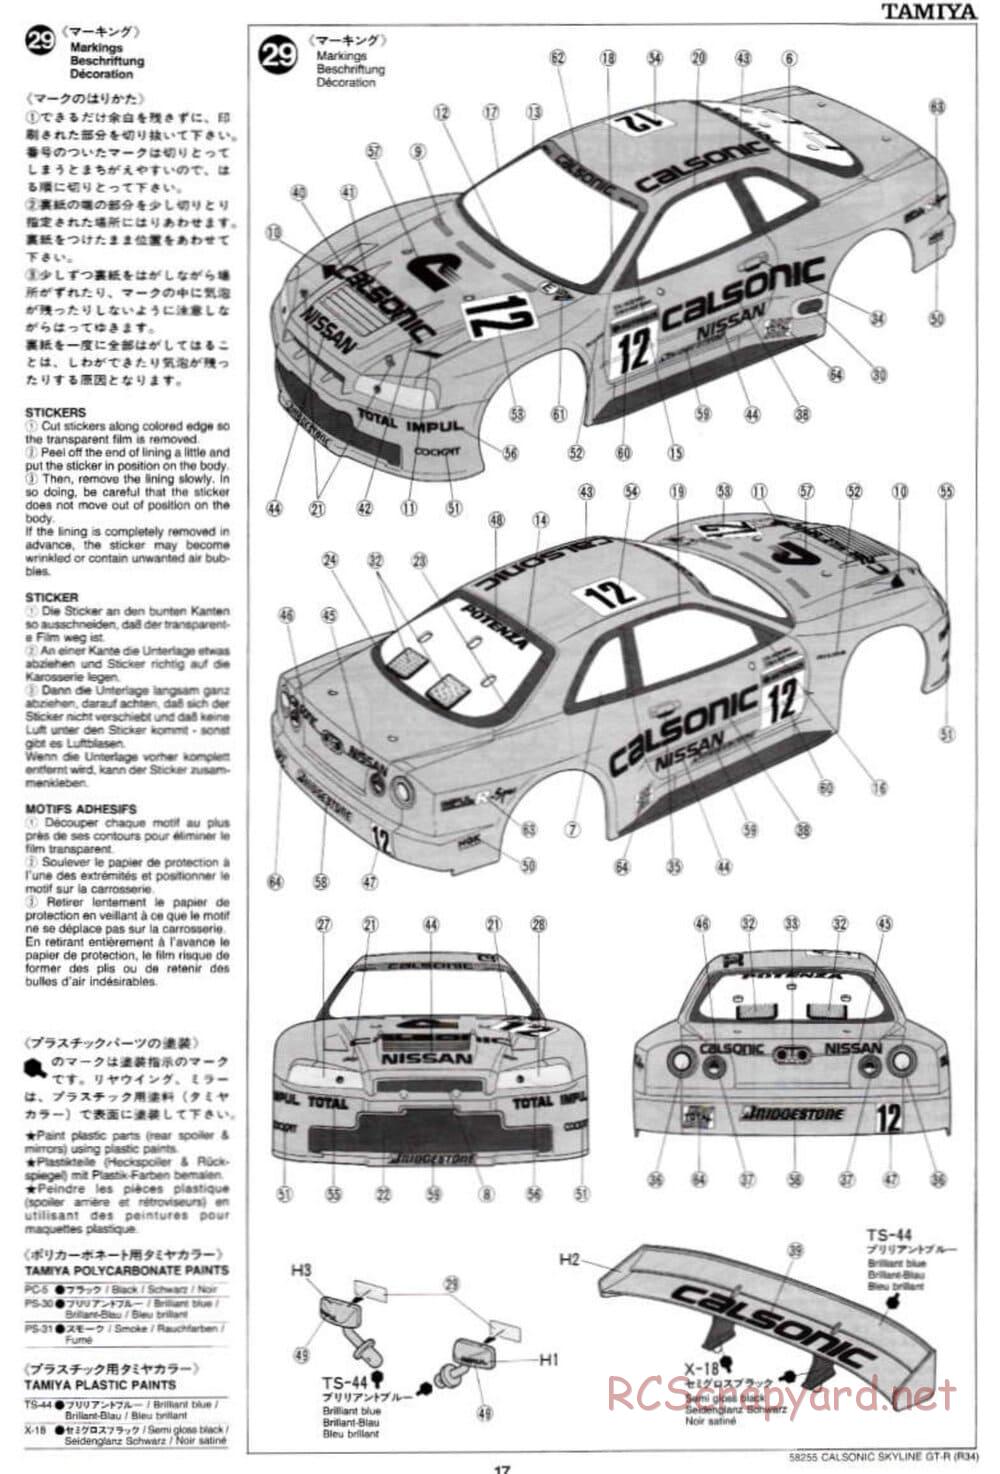 Tamiya - Calsonic Skyline GT-R (R34) - TL-01 Chassis - Manual - Page 17